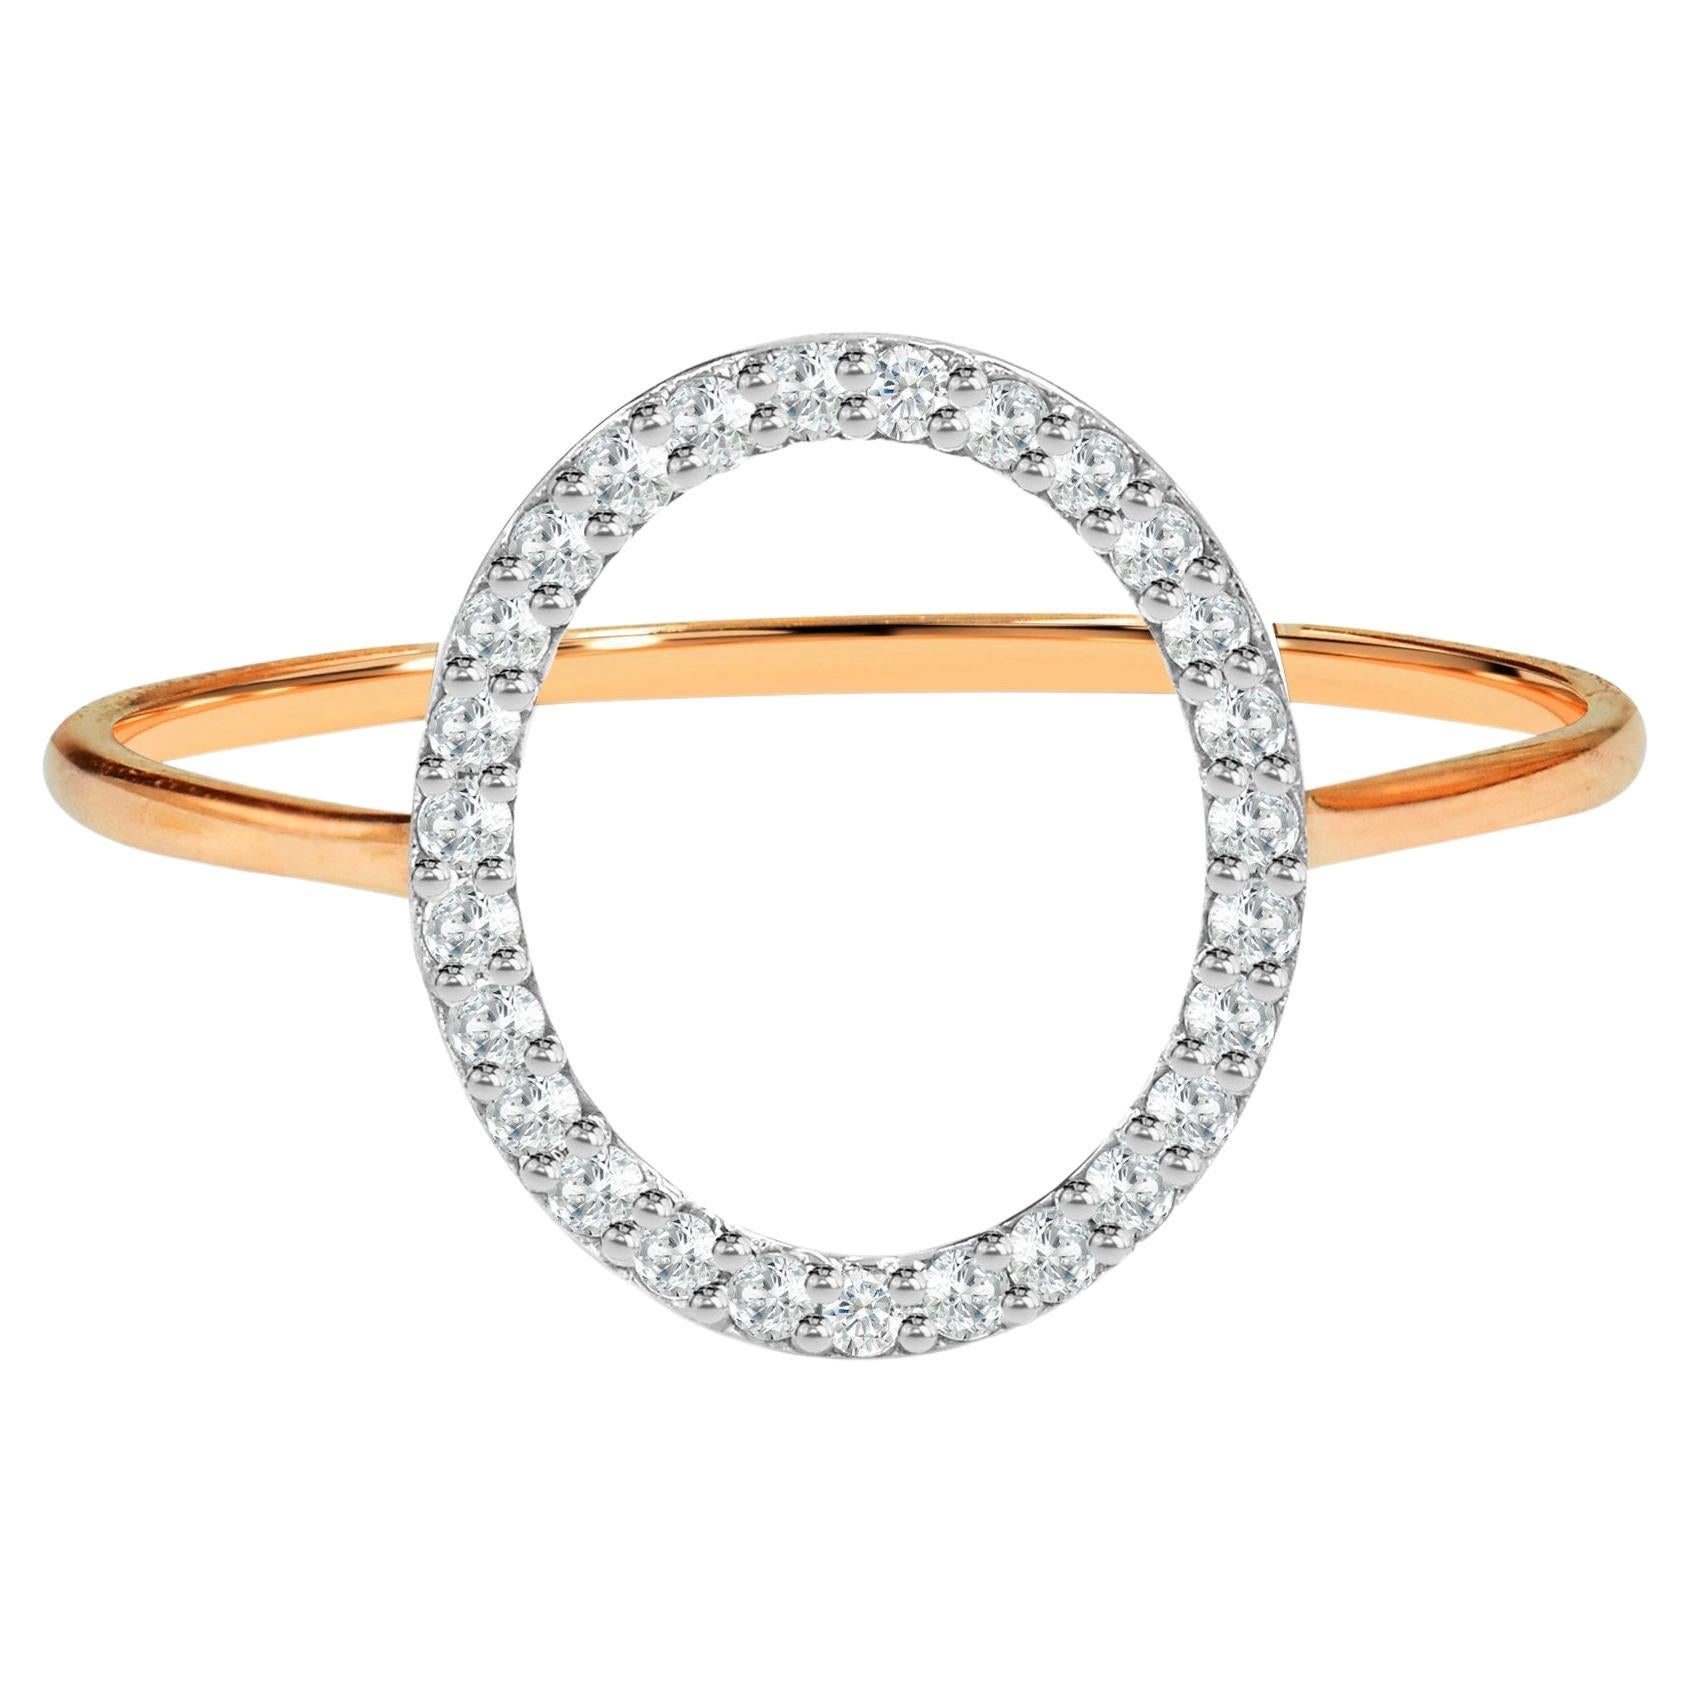 For Sale:  14K Gold Open Circle Diamond Ring Semi-Oval Proposal Ring